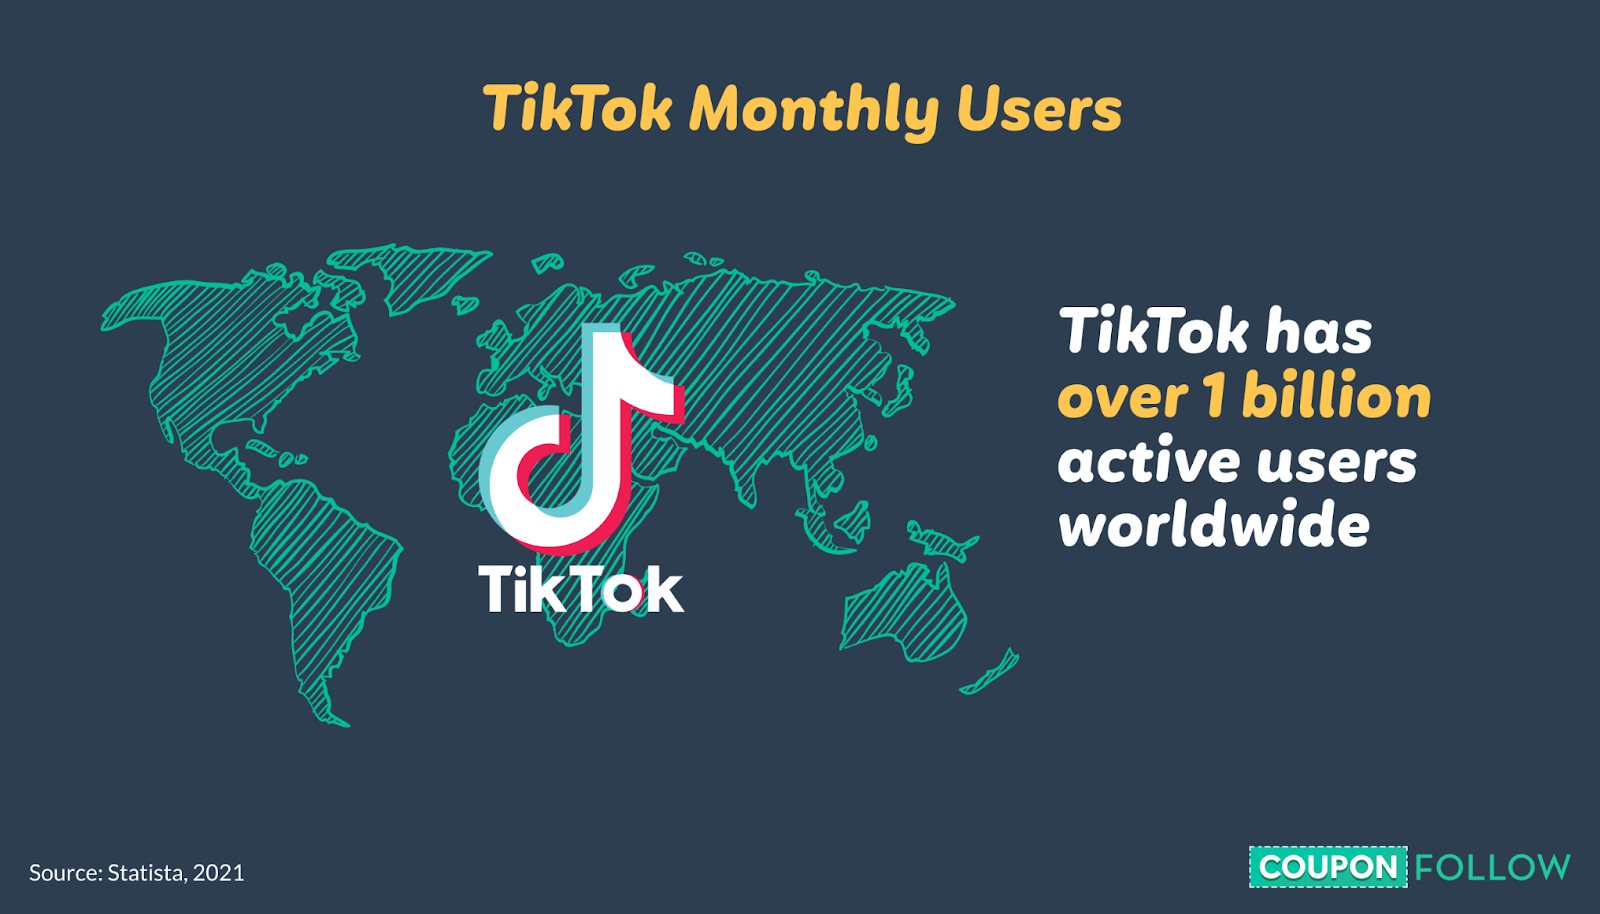 graph depicting number of active TikTok users worldwide